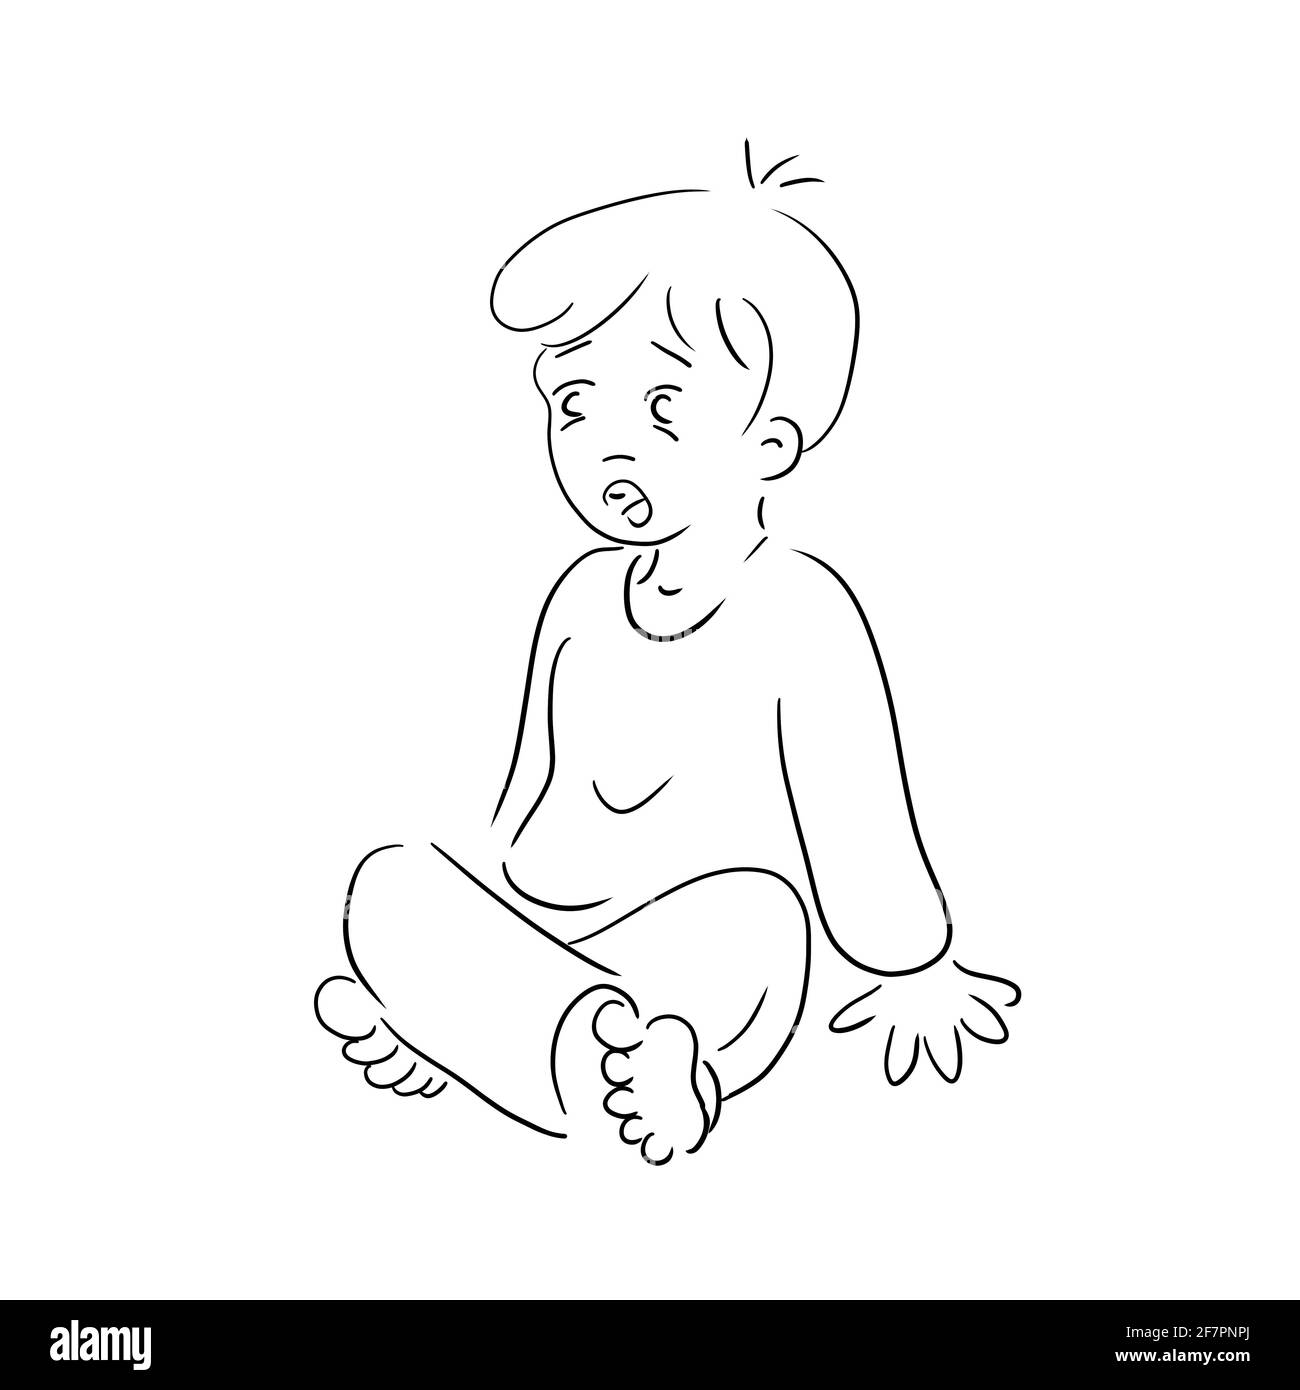 Boy sitting cross-legged barefoot on the floor arms support upper body he is scared or surprised Logo design black and white child cute layout templat Stock Photo